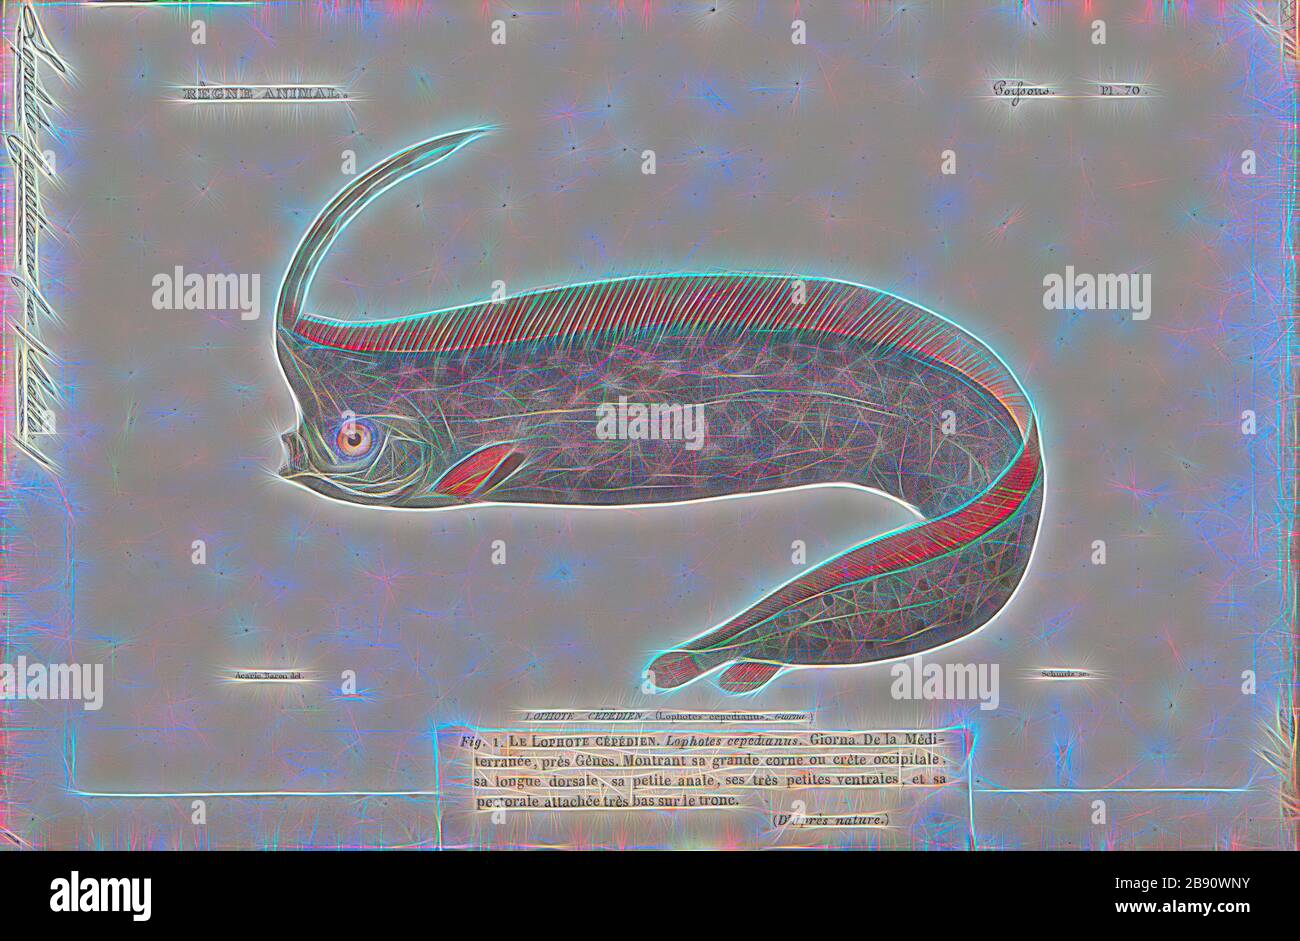 Lophotus cepedianus, Print, Lophotus is a genus of crestfishes, 1700-1880, Reimagined by Gibon, design of warm cheerful glowing of brightness and light rays radiance. Classic art reinvented with a modern twist. Photography inspired by futurism, embracing dynamic energy of modern technology, movement, speed and revolutionize culture. Stock Photo